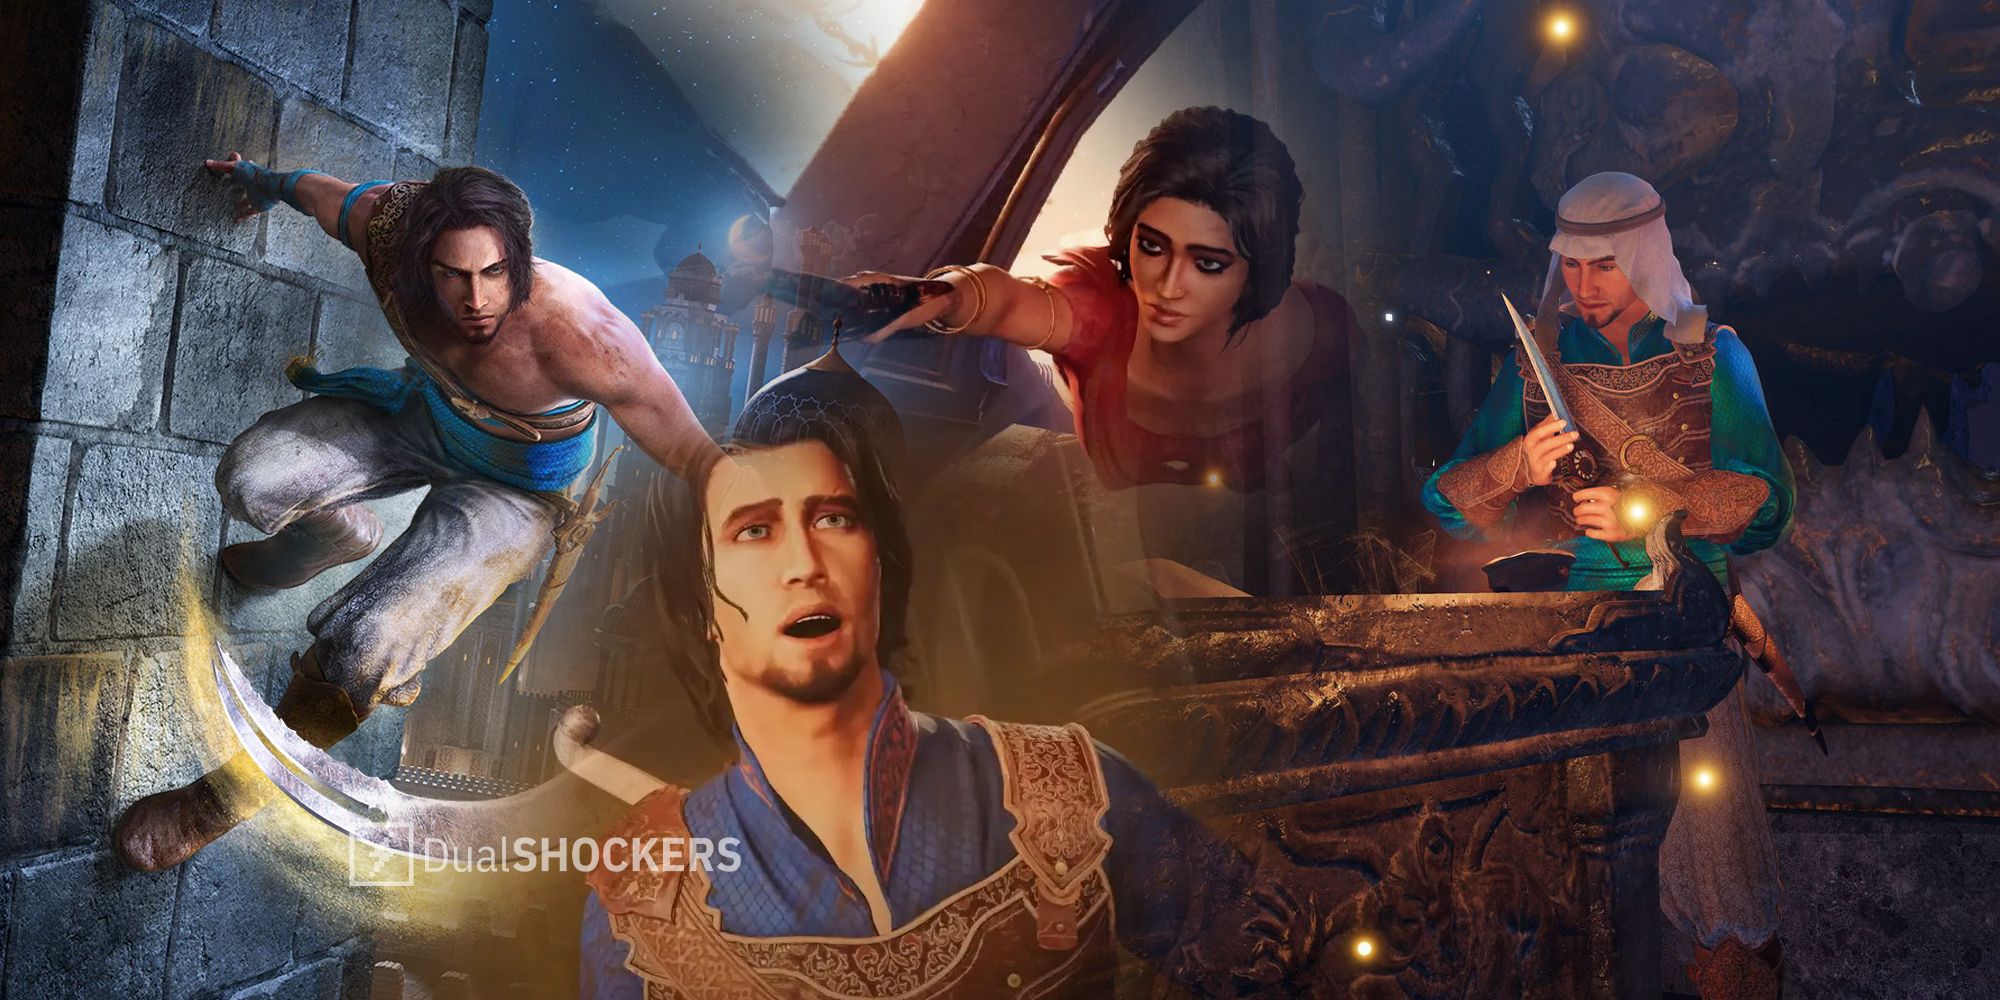 Prince of Persia: The Sands of Time Remake wants to introduce a